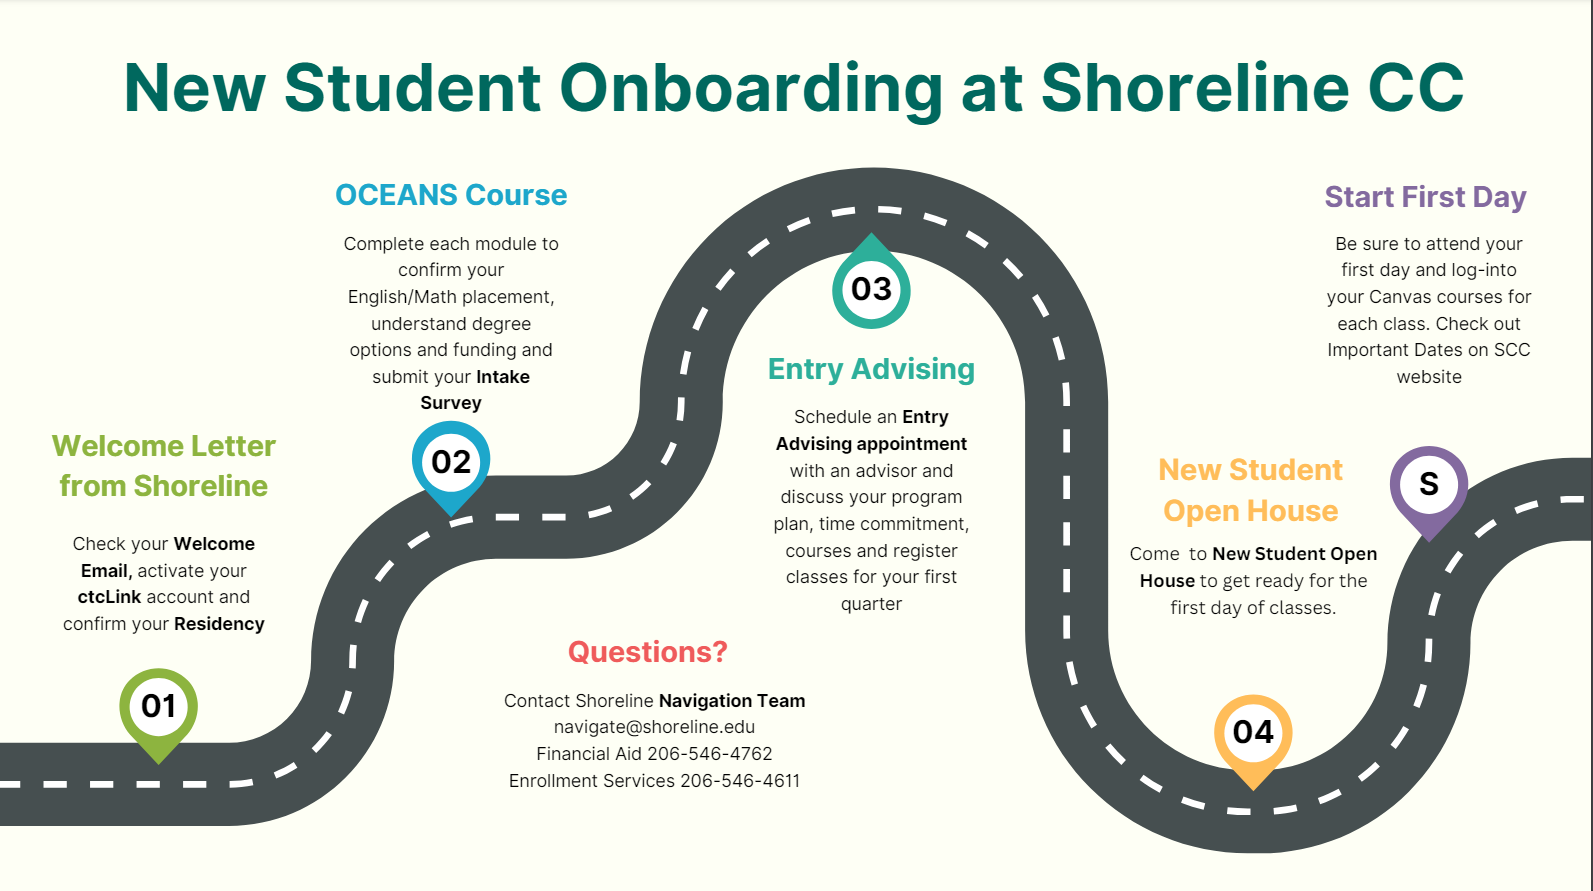 New Student Onboarding Map